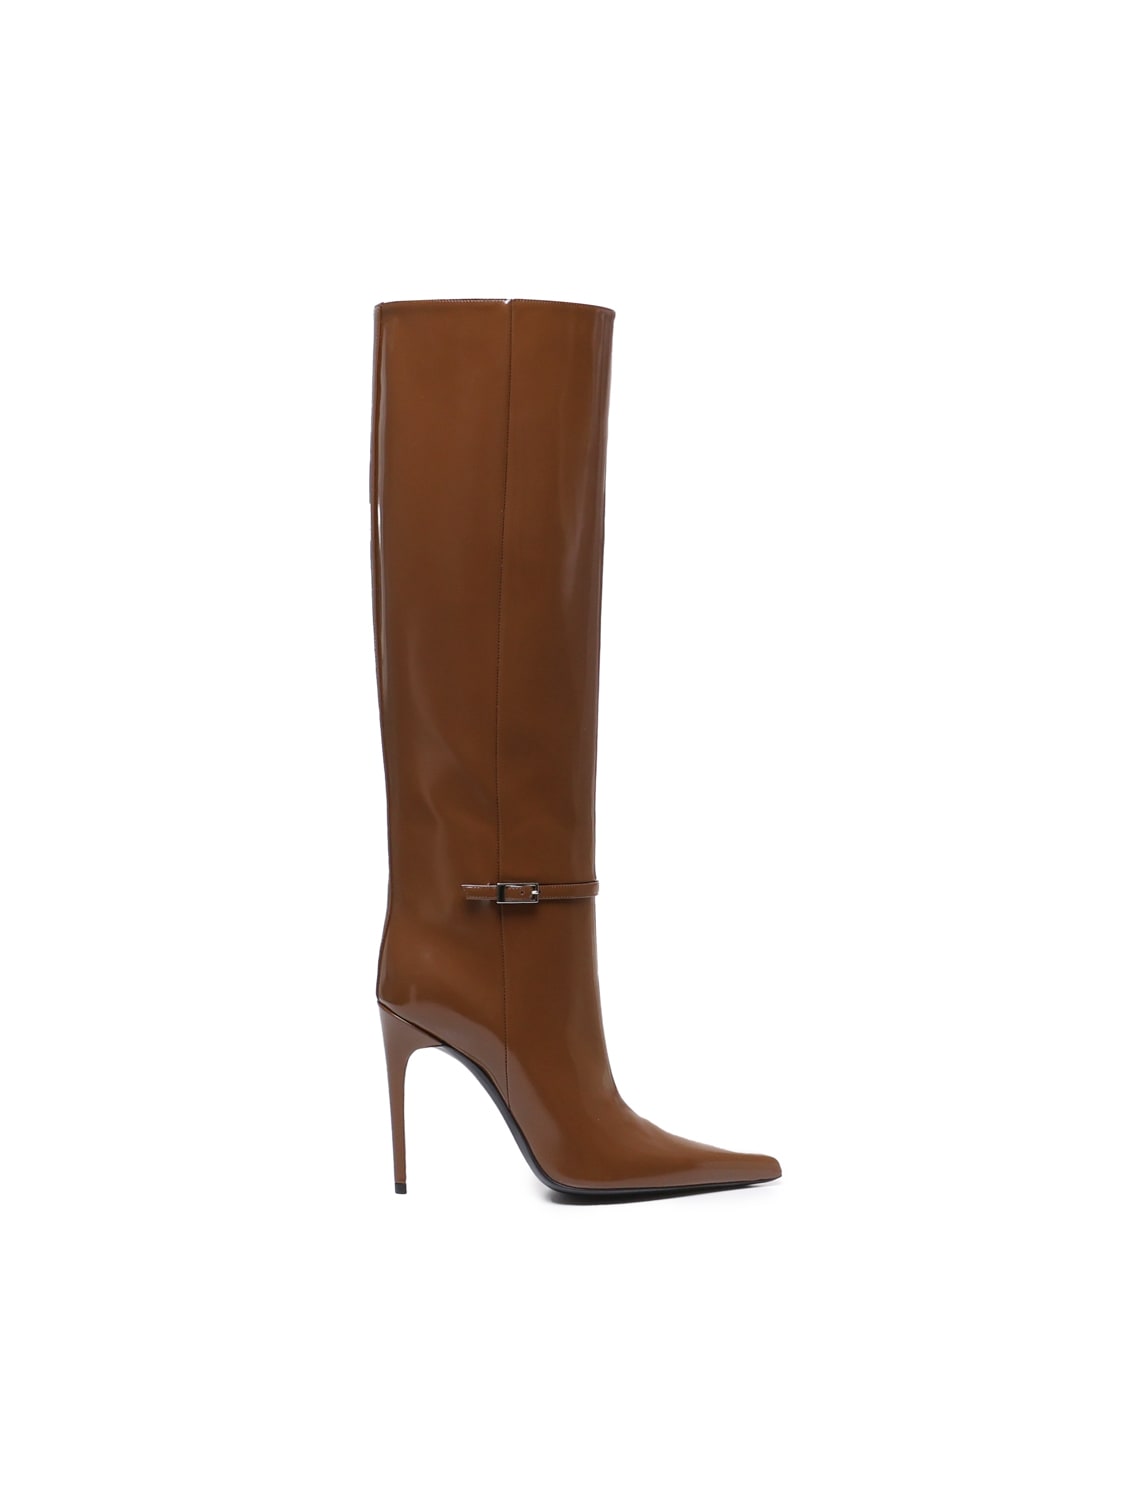 Saint Laurent Tube Boots With Stiletto Heel In Brown